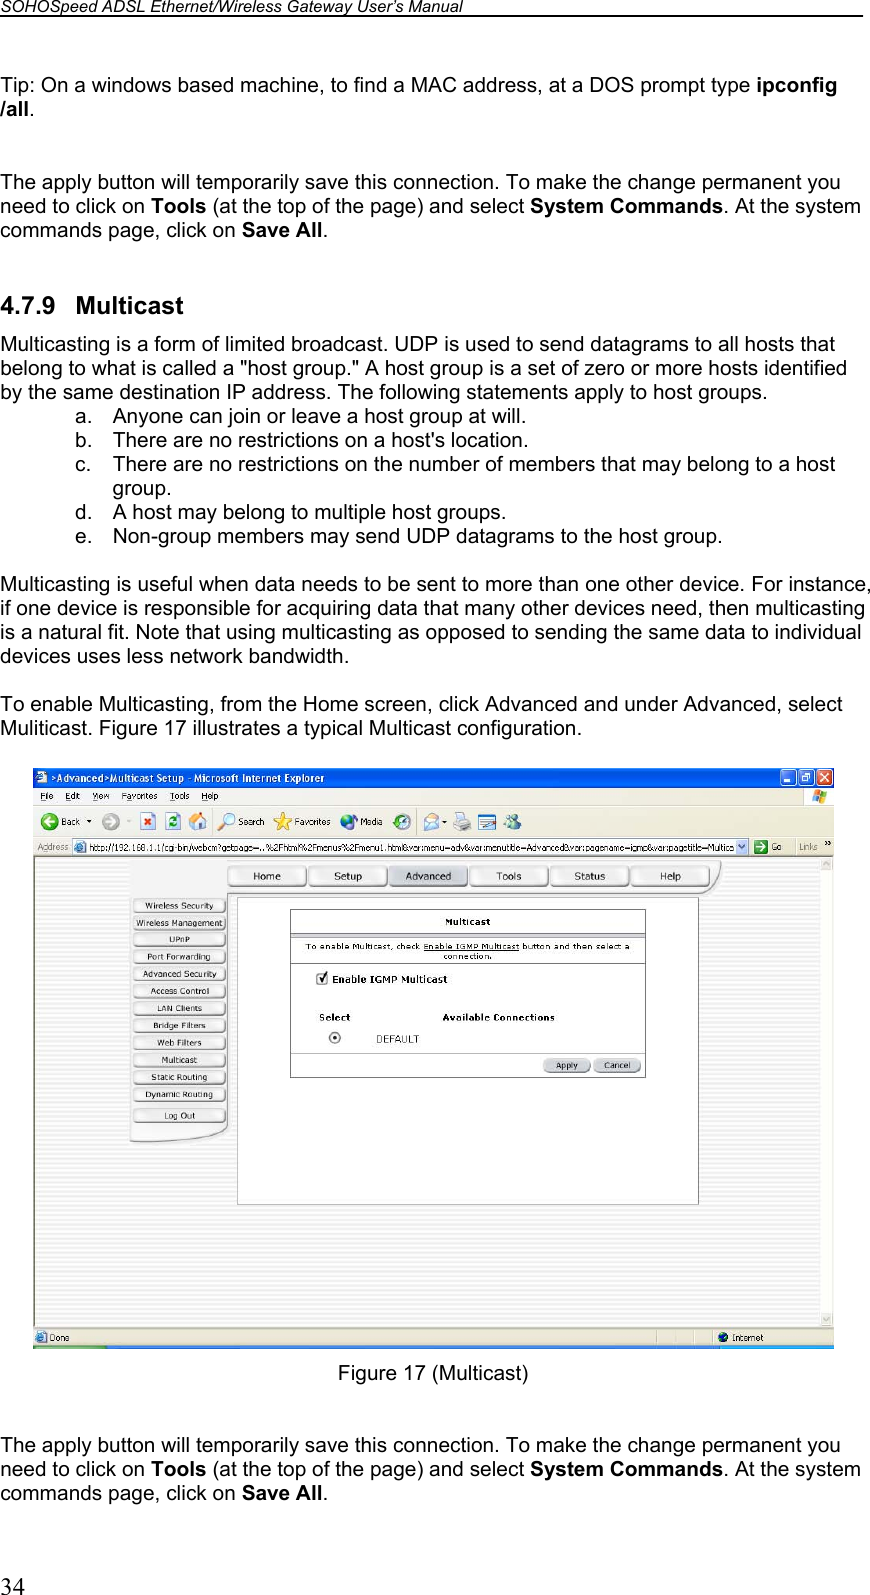 SOHOSpeed ADSL Ethernet/Wireless Gateway User’s Manual    34 Tip: On a windows based machine, to find a MAC address, at a DOS prompt type ipconfig /all.  The apply button will temporarily save this connection. To make the change permanent you need to click on Tools (at the top of the page) and select System Commands. At the system commands page, click on Save All.  4.7.9 Multicast Multicasting is a form of limited broadcast. UDP is used to send datagrams to all hosts that belong to what is called a &quot;host group.&quot; A host group is a set of zero or more hosts identified by the same destination IP address. The following statements apply to host groups. a.  Anyone can join or leave a host group at will. b.  There are no restrictions on a host&apos;s location. c.  There are no restrictions on the number of members that may belong to a host group. d.  A host may belong to multiple host groups. e.  Non-group members may send UDP datagrams to the host group.  Multicasting is useful when data needs to be sent to more than one other device. For instance, if one device is responsible for acquiring data that many other devices need, then multicasting is a natural fit. Note that using multicasting as opposed to sending the same data to individual devices uses less network bandwidth.  To enable Multicasting, from the Home screen, click Advanced and under Advanced, select Muliticast. Figure 17 illustrates a typical Multicast configuration.   Figure 17 (Multicast)  The apply button will temporarily save this connection. To make the change permanent you need to click on Tools (at the top of the page) and select System Commands. At the system commands page, click on Save All. 